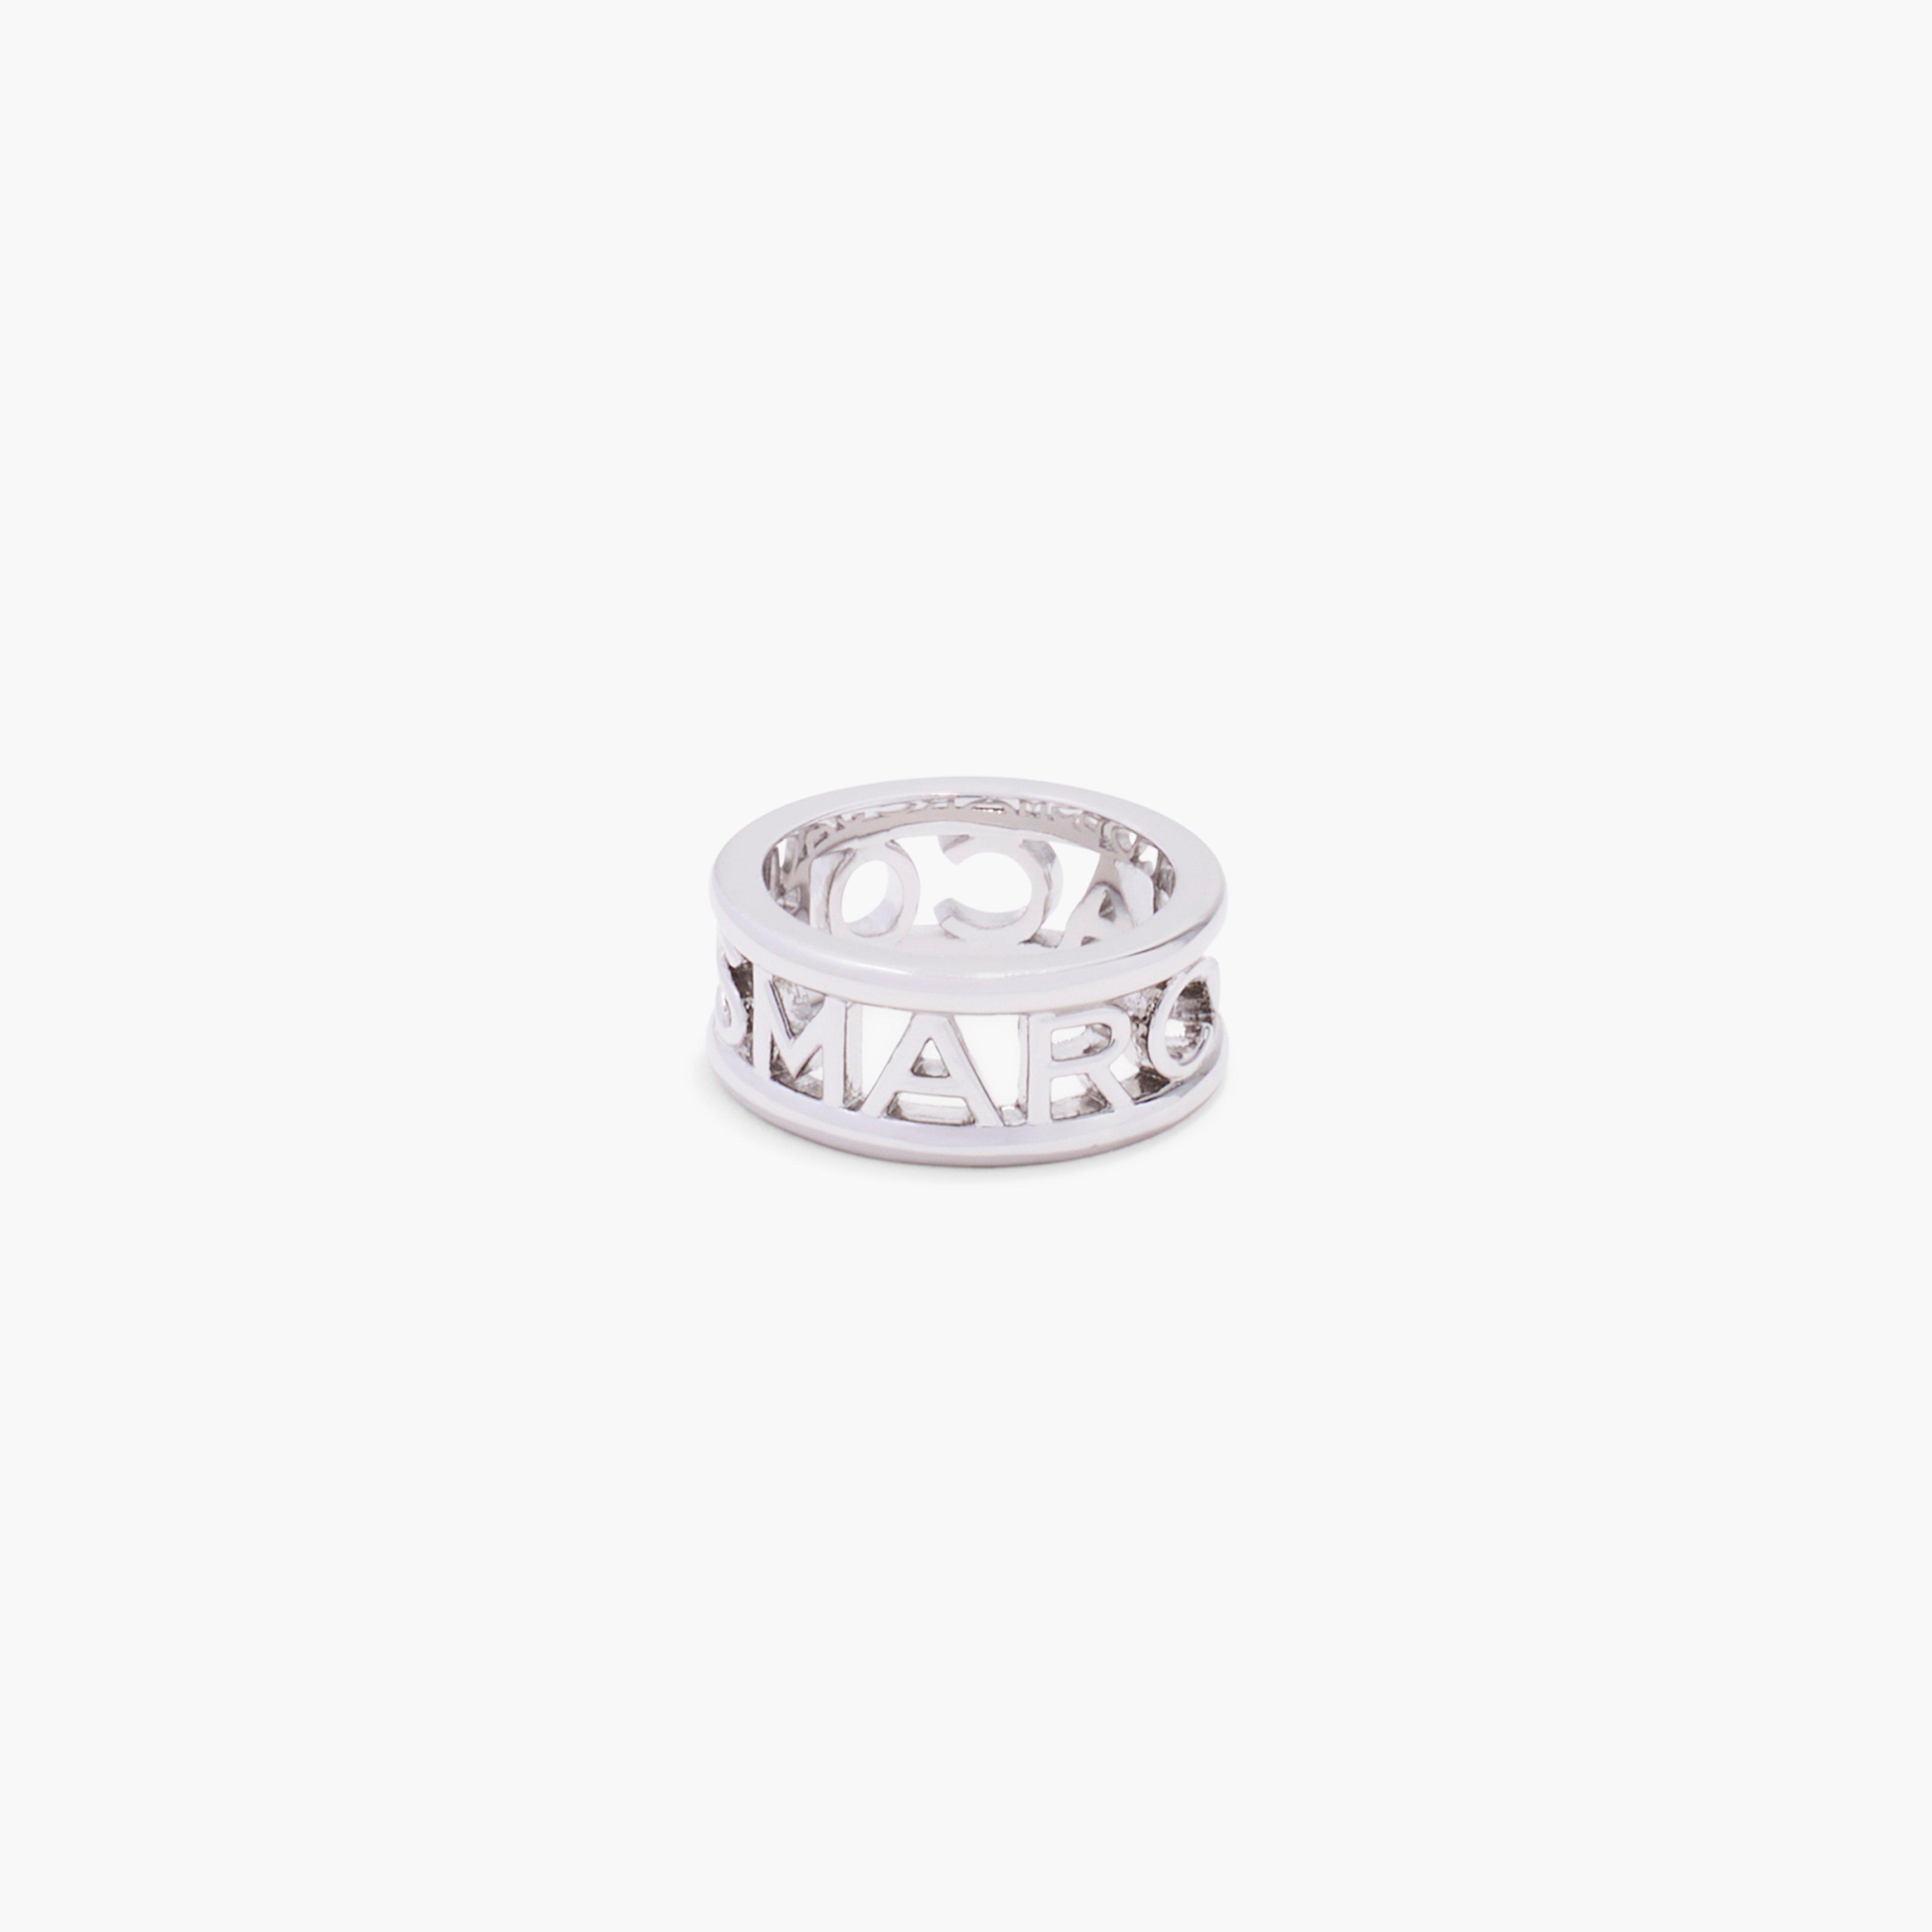 Marc by Marc jacobs The Monogram Ring,SILVER